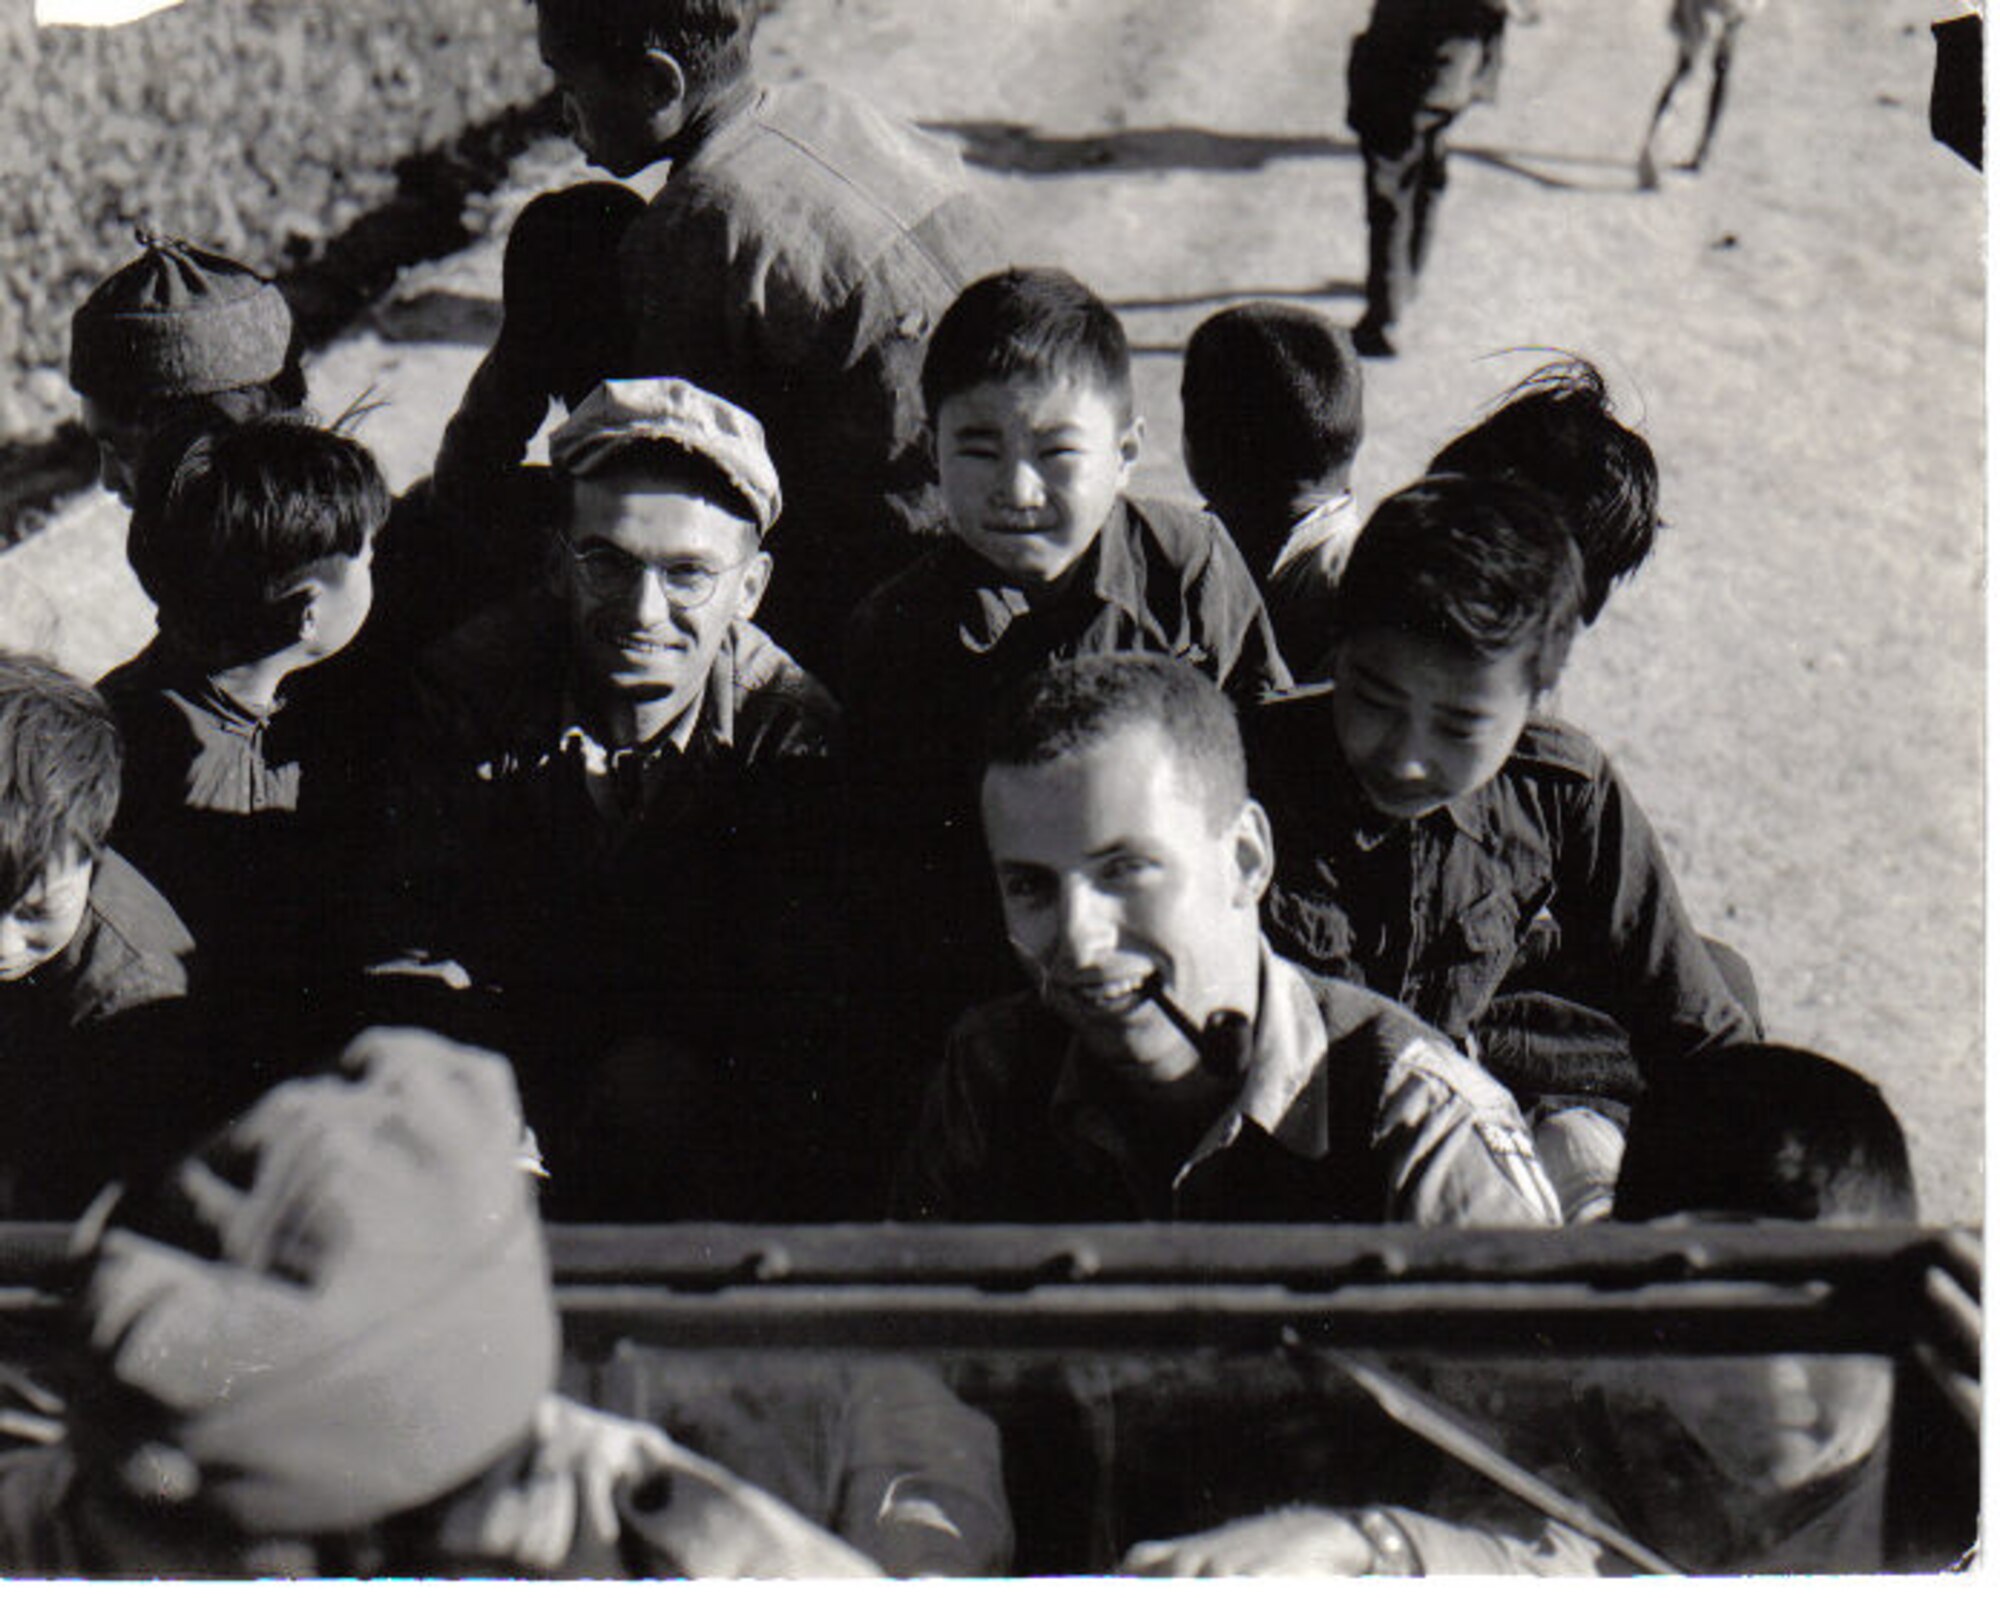 S/Sgt John Brasko (left, a Pennsylvania Air Guardsman before and after the war) and 1st Lt. Arthur Clark (who remained on active duty and became a Major General) smile for the camera as Clark drives a jeep with accompanying as young Chinese citizens at Chengkung Airfield in China, circa early 1945.  They served with “G” Flight of the 35th Photo Recon Squadron at several different forward airfields.  (Courtesy Mr. John Brasko, Jr.)